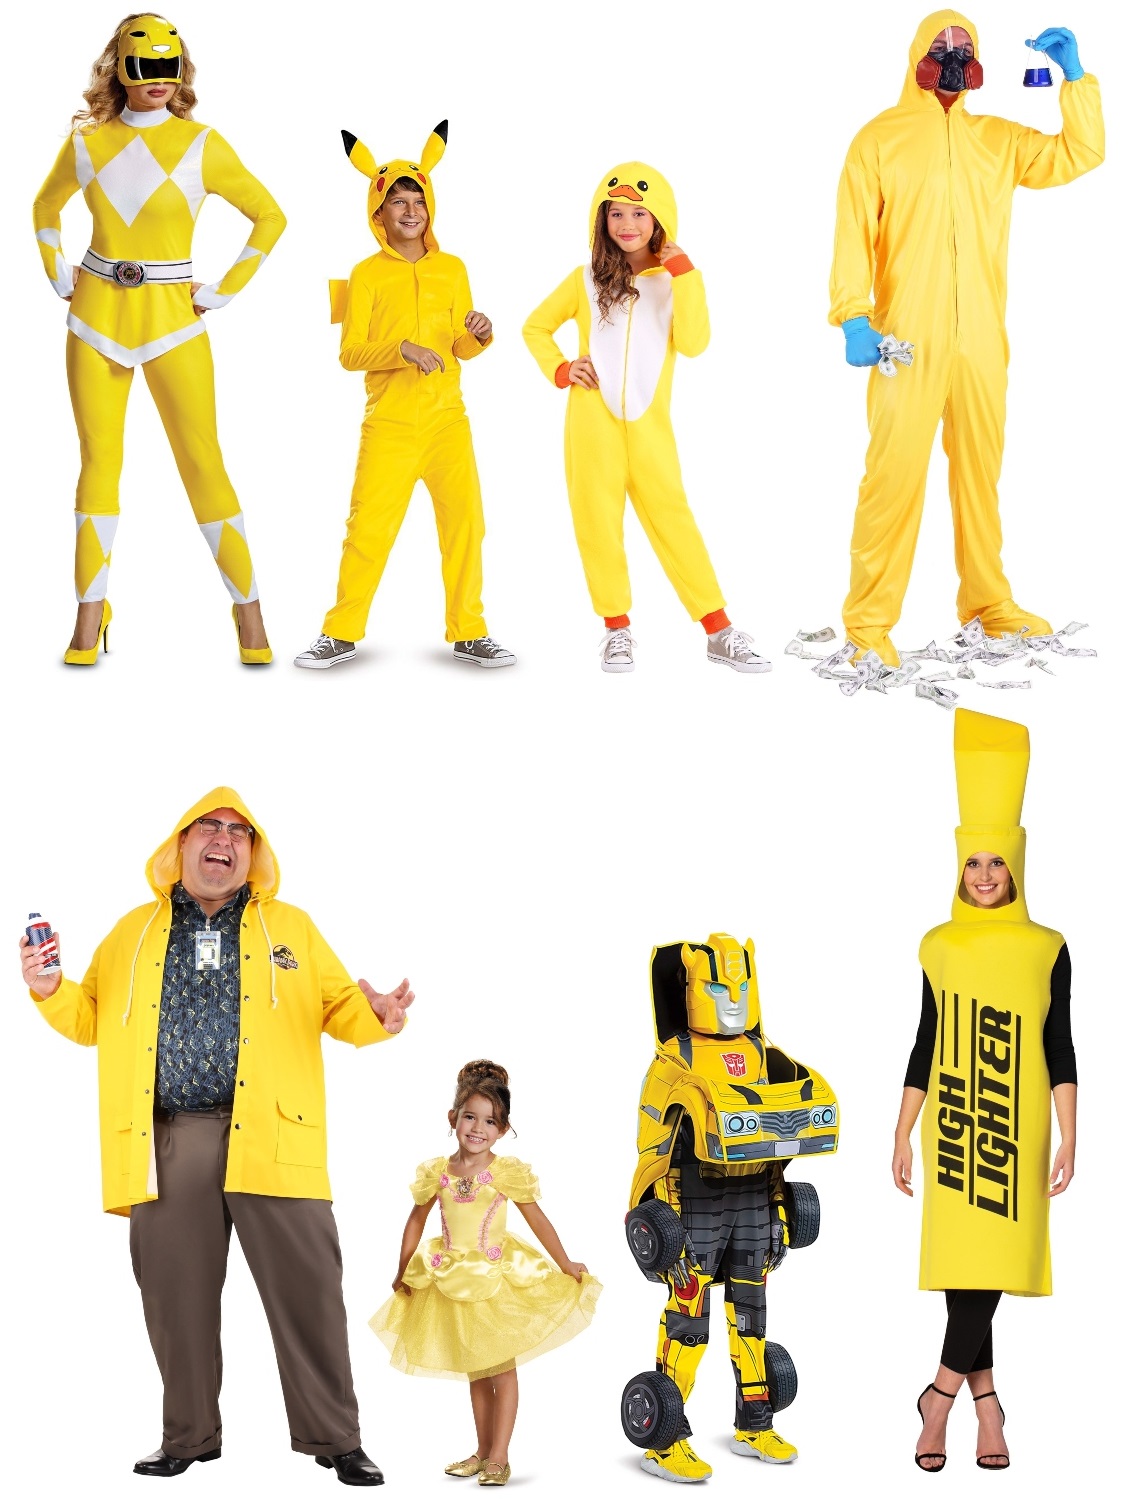 Group Halloween costumes: The 22 best ideas of 2021